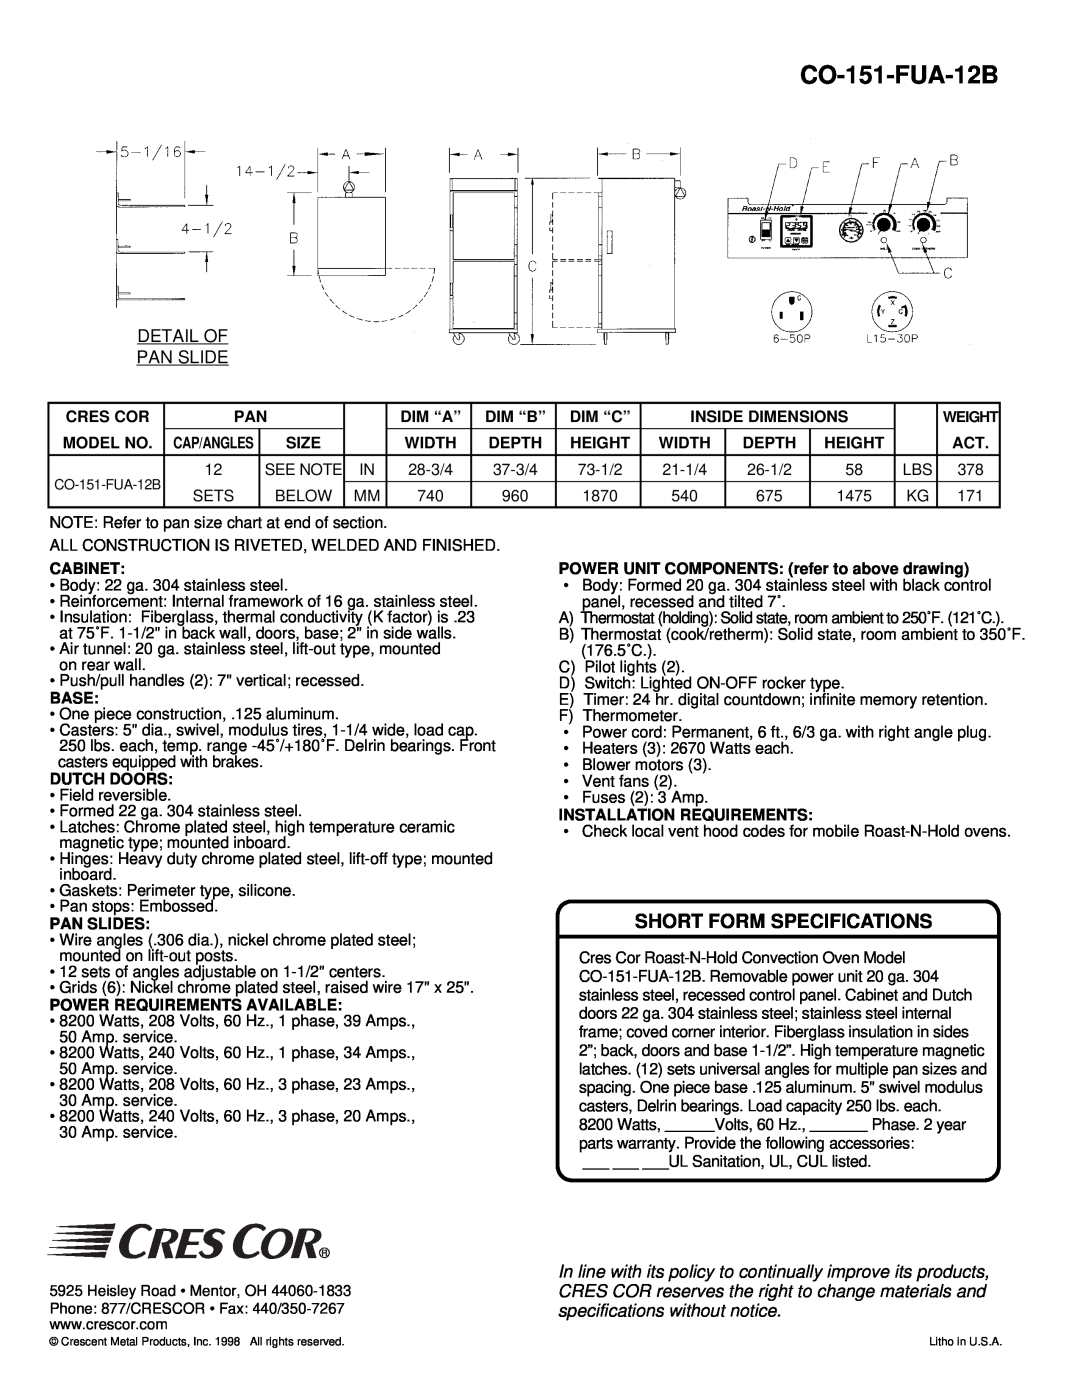 Cres Cor CO-151-FUA-12B operation manual Short Form Specifications 